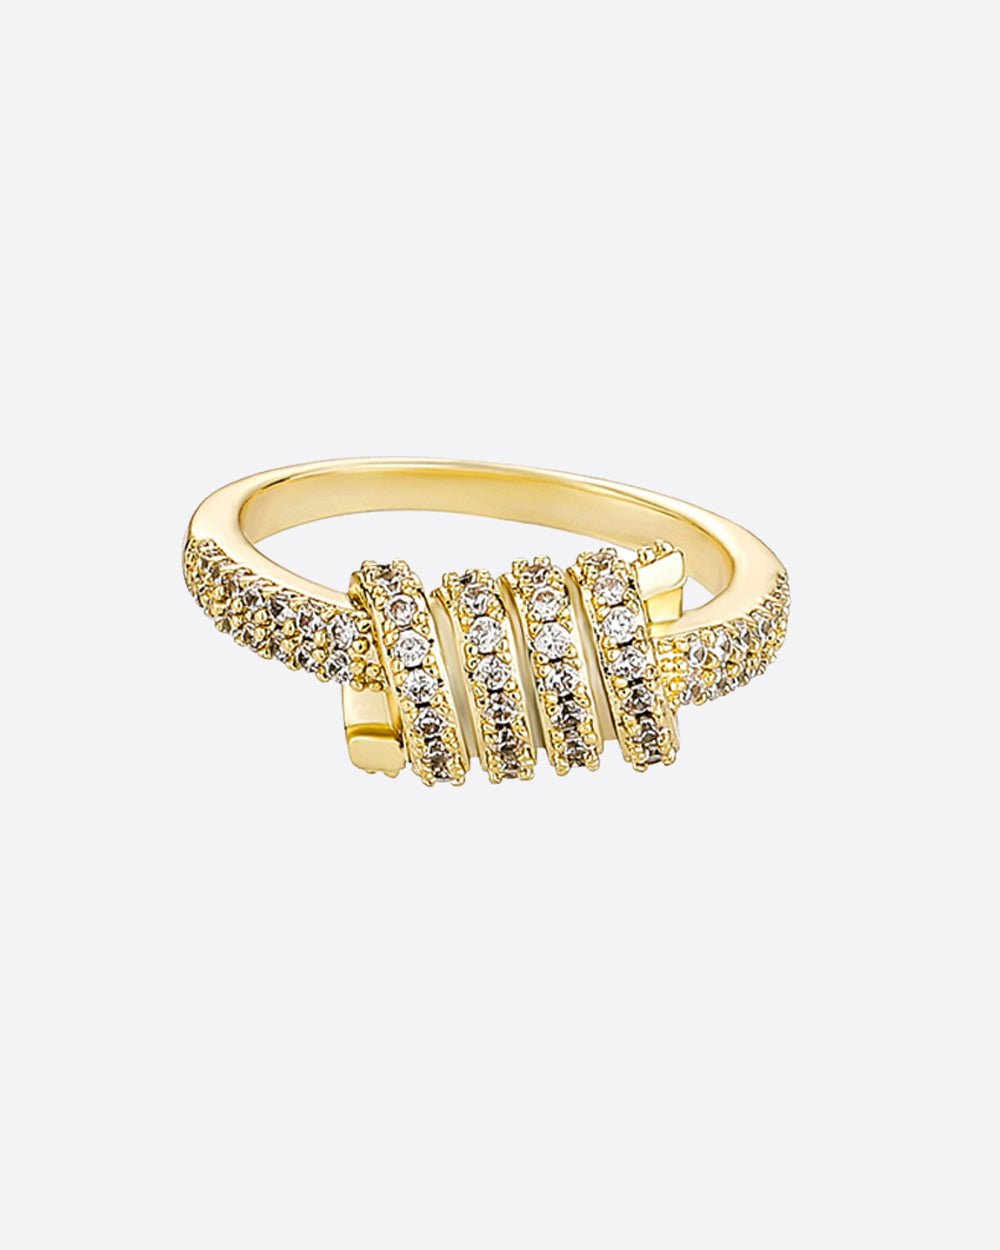 PAVED ROPE KNOT RING. - 18K GOLD - Drippy Amsterdam